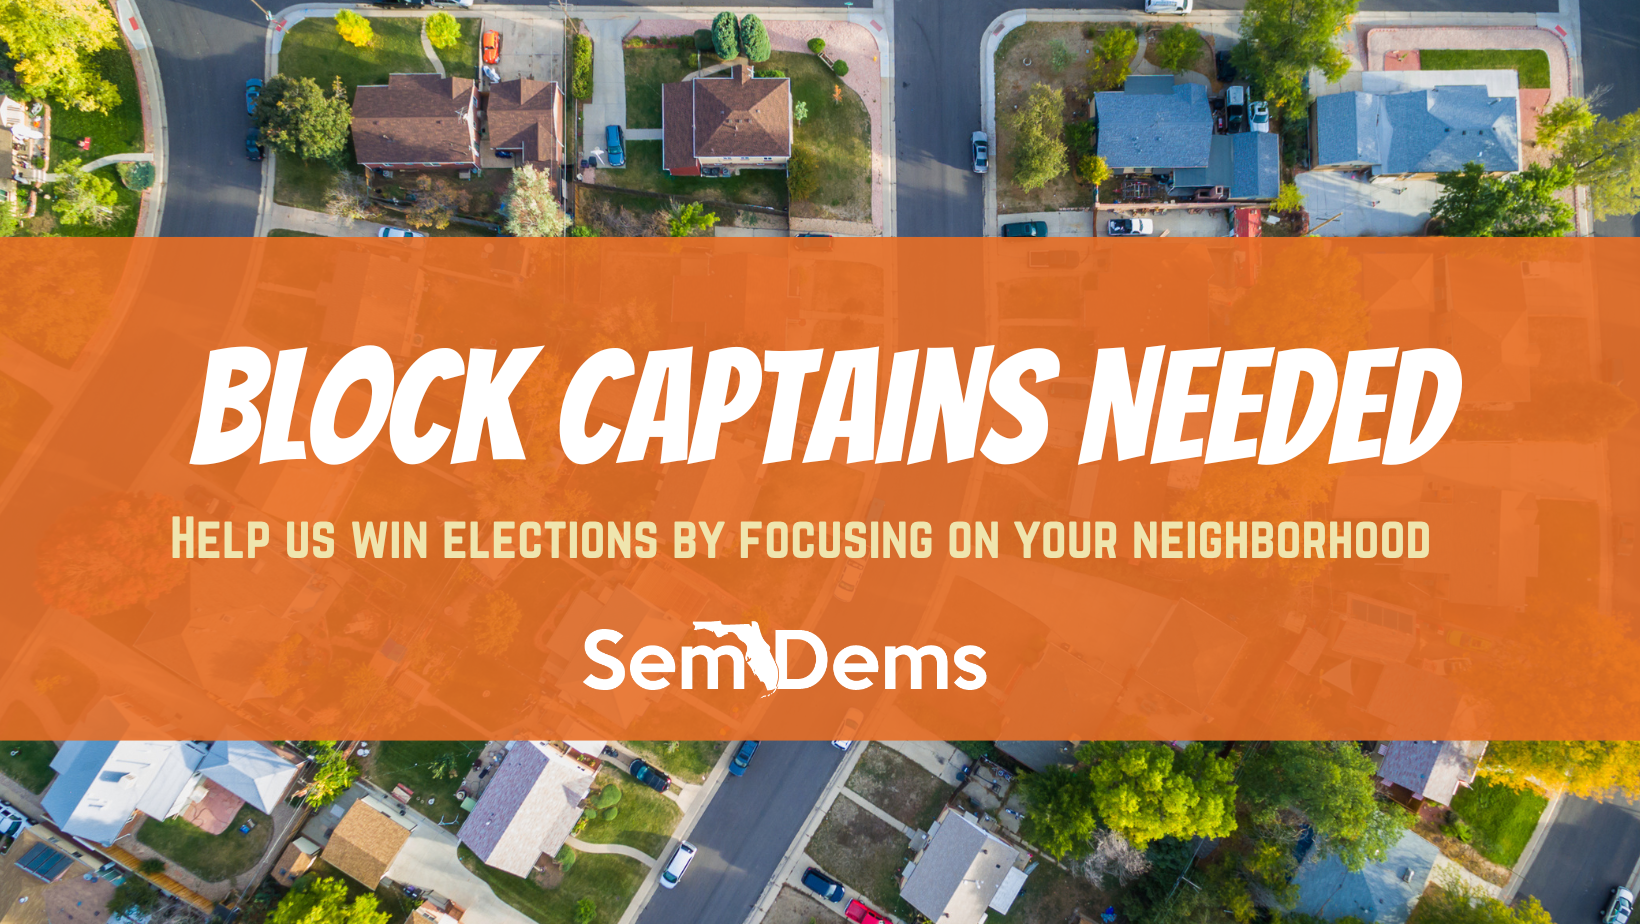 SemDems Block Captains Needed: Help Us Win Elections by Focusing on Your Neighborhood